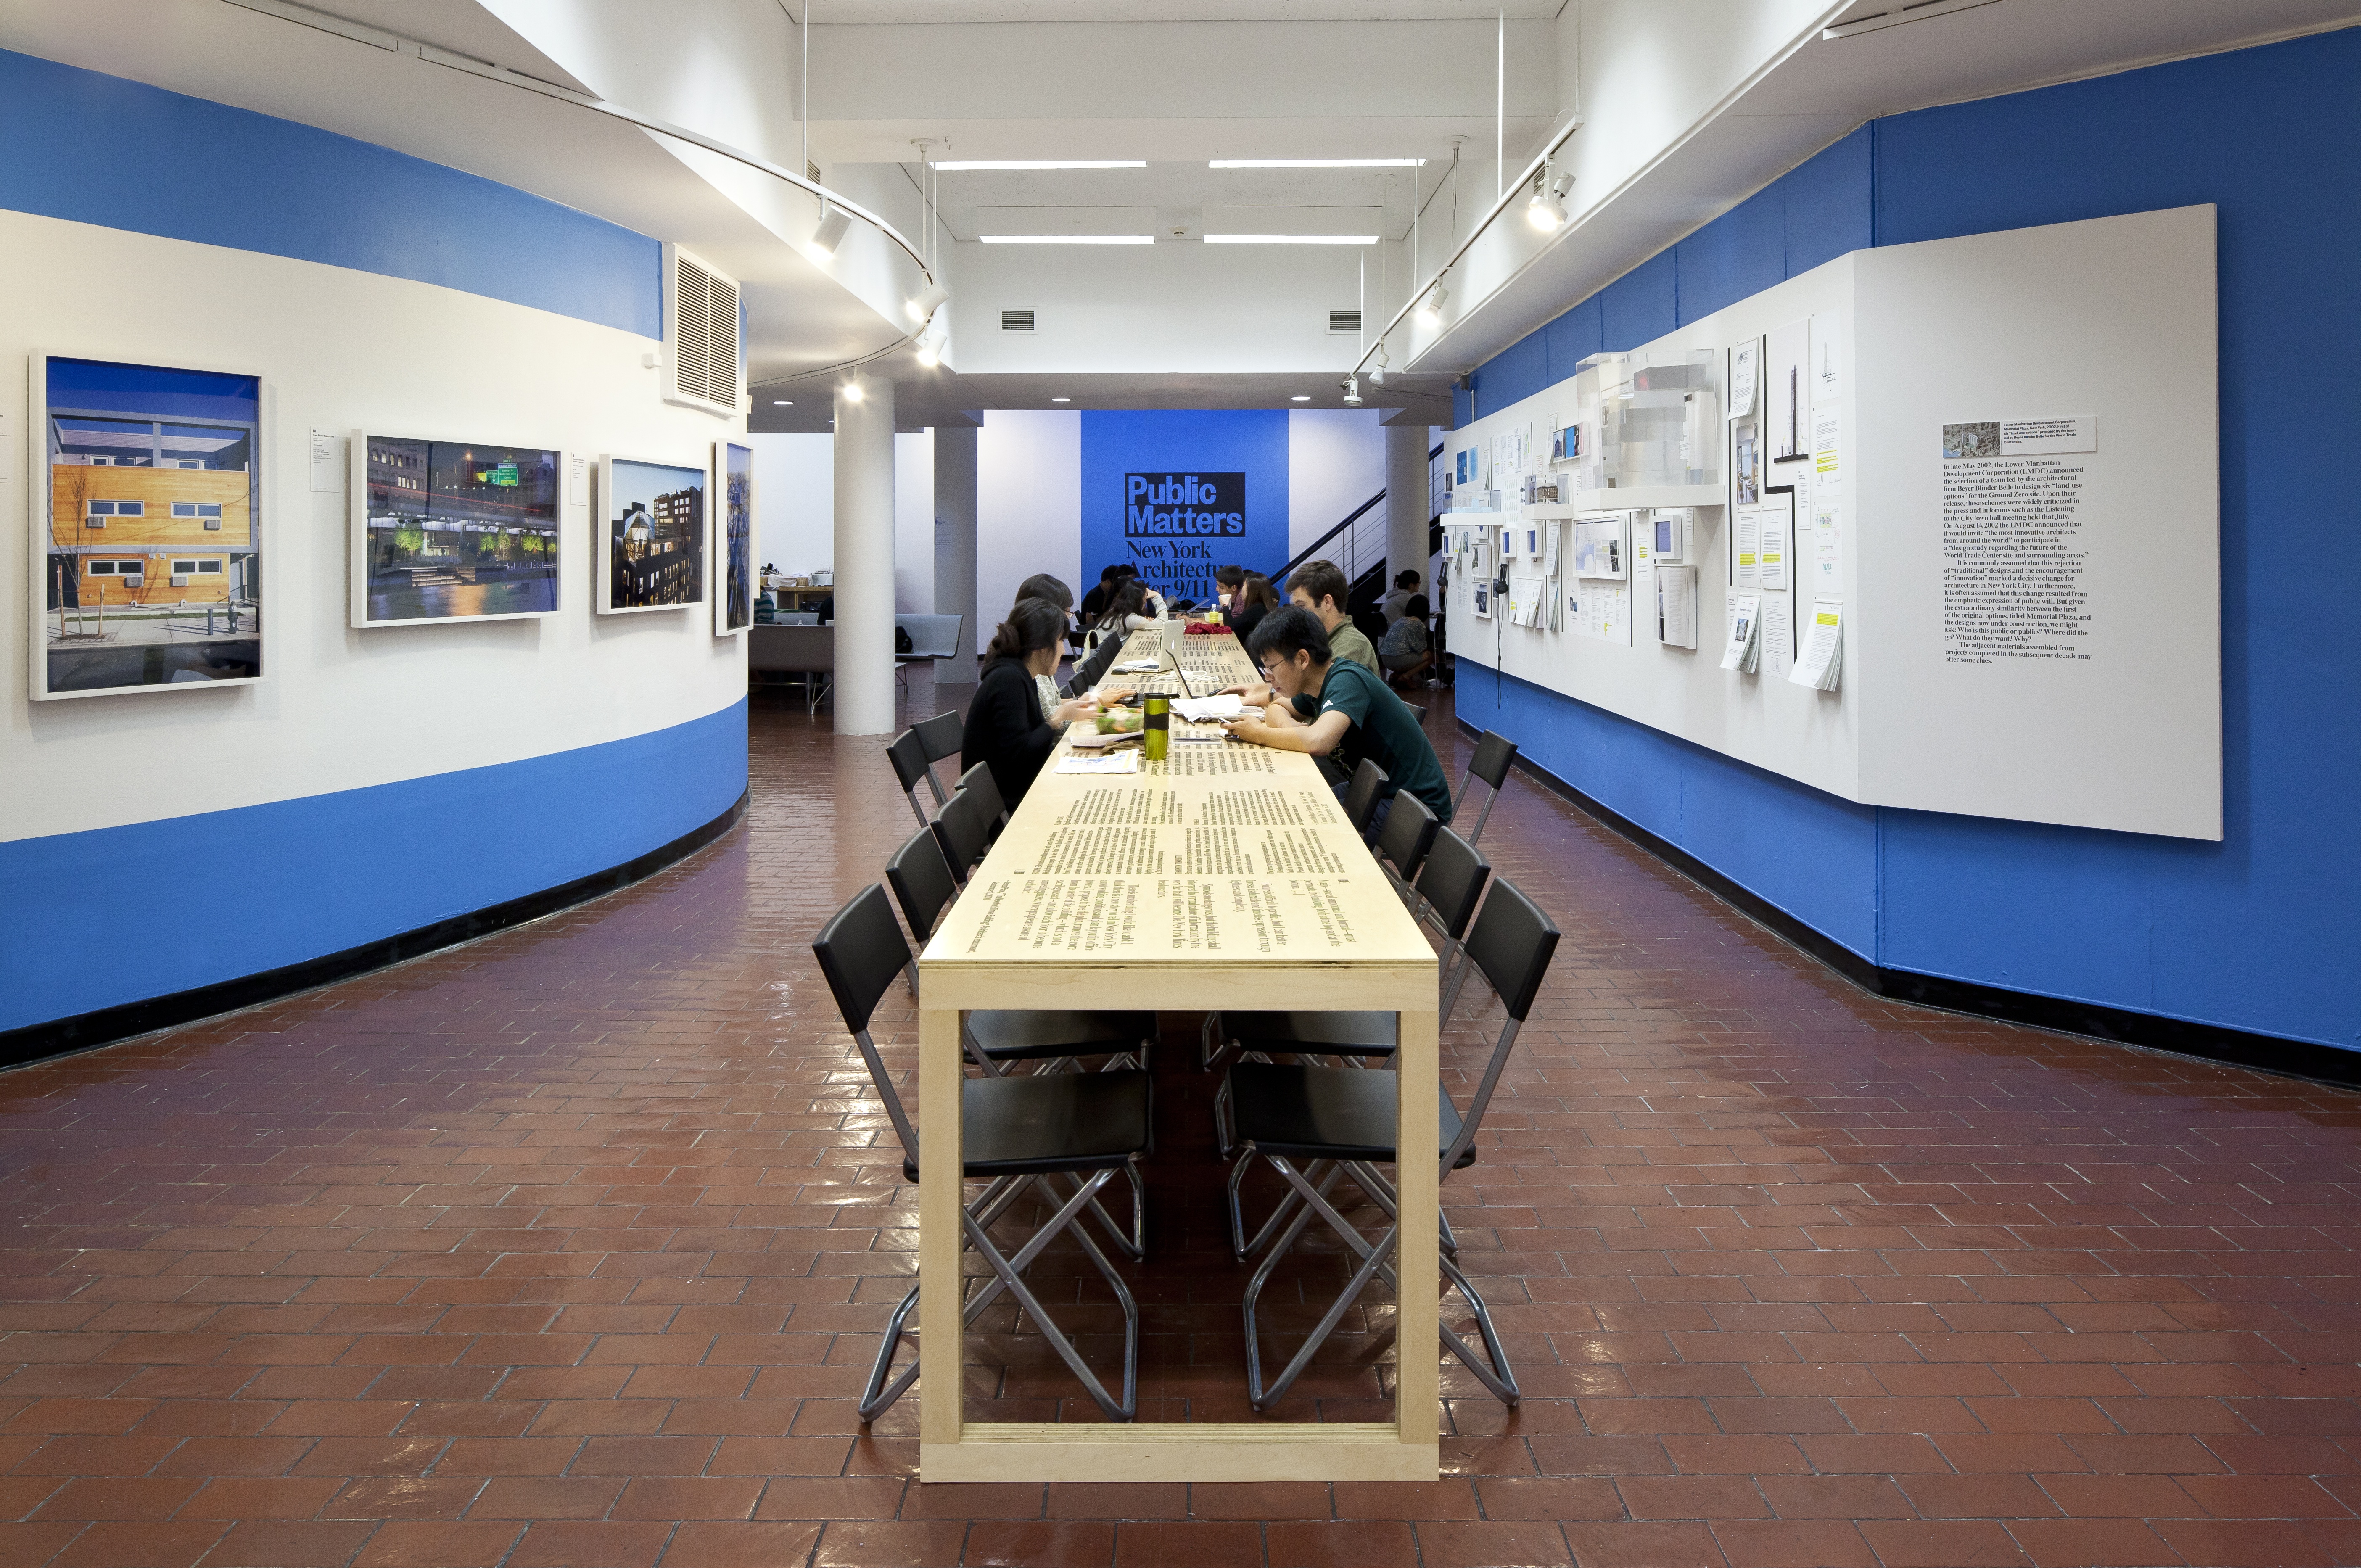 A long, narrow table with people working recedes into the background of an apparent cafe? gallery? On the left wall are framed photographs of buildings, on the right wall is a collection of paperwork, small screens, headphones, and small photographs. In the back, painted on the blue walls, is the black text "Public Matters: New York Architecture after 9/11." 